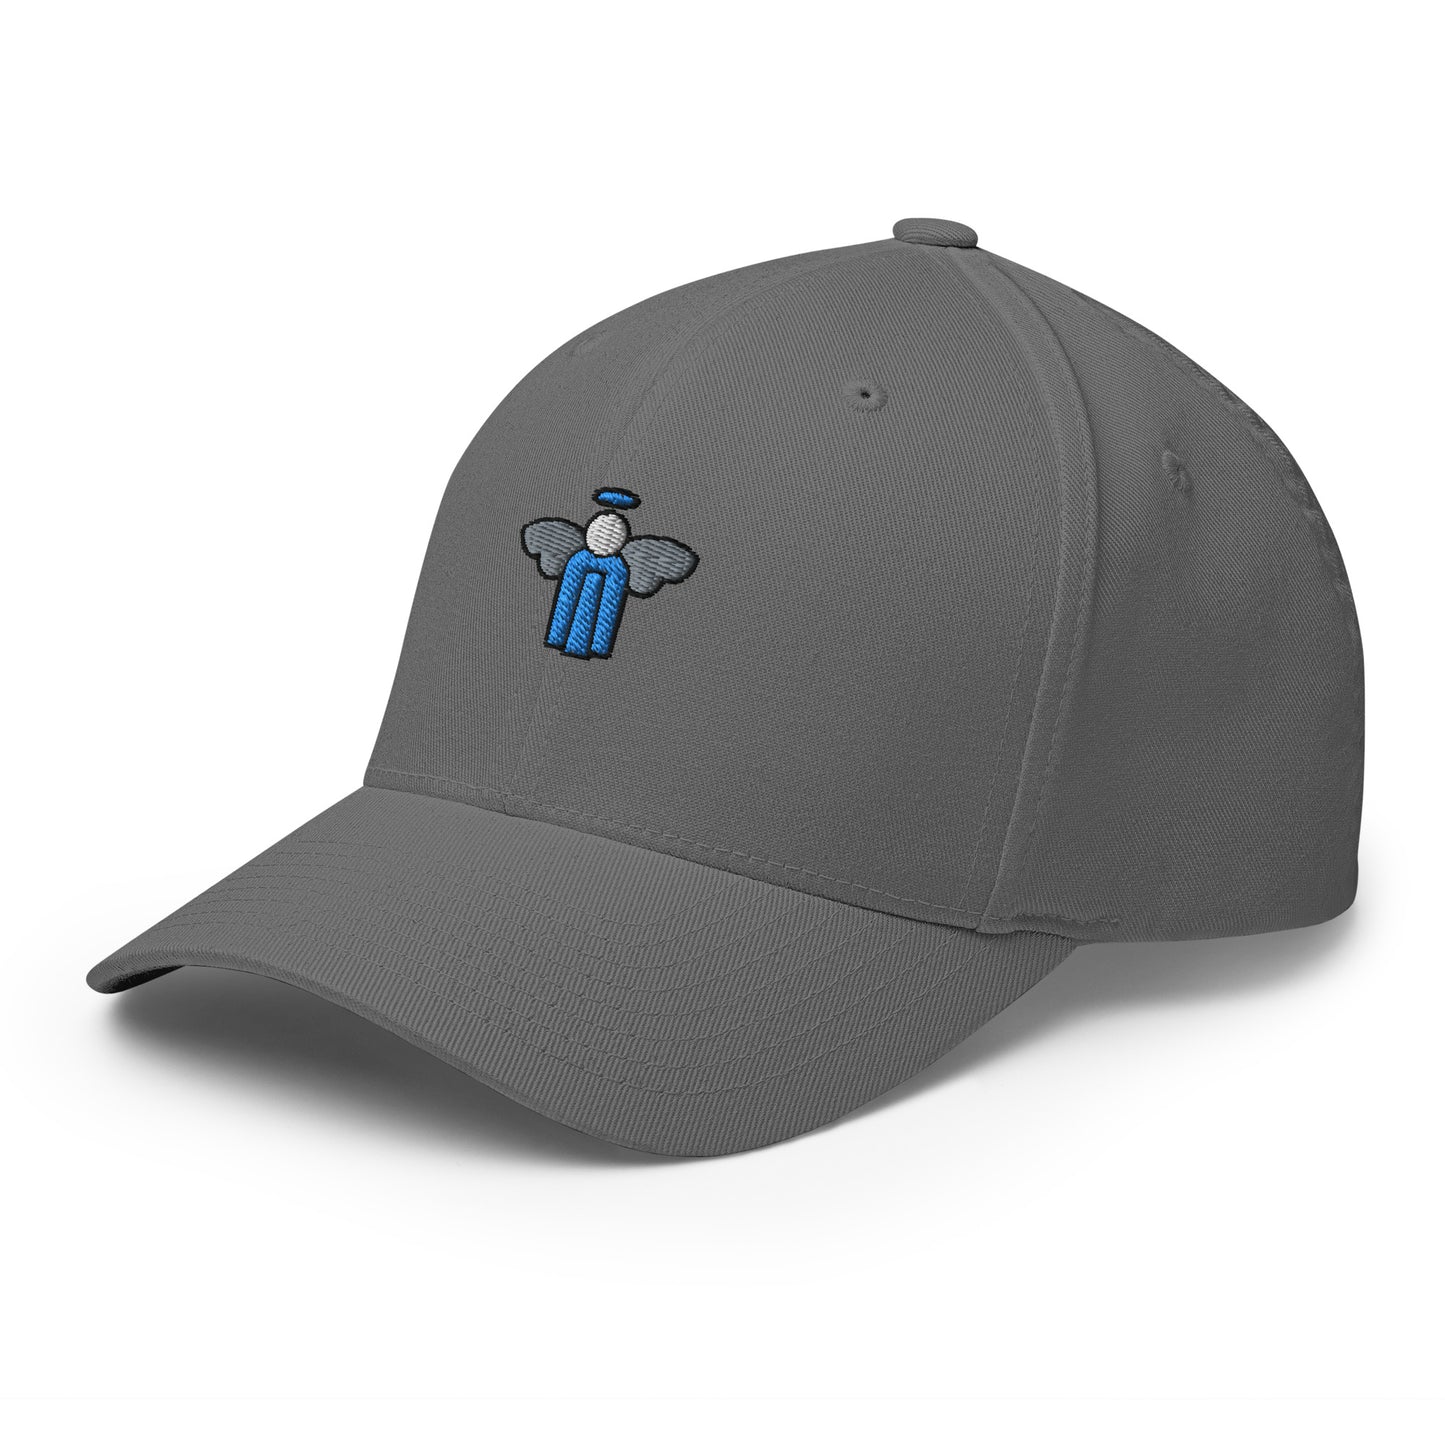  cap-from-the-front-with-angel-symbol